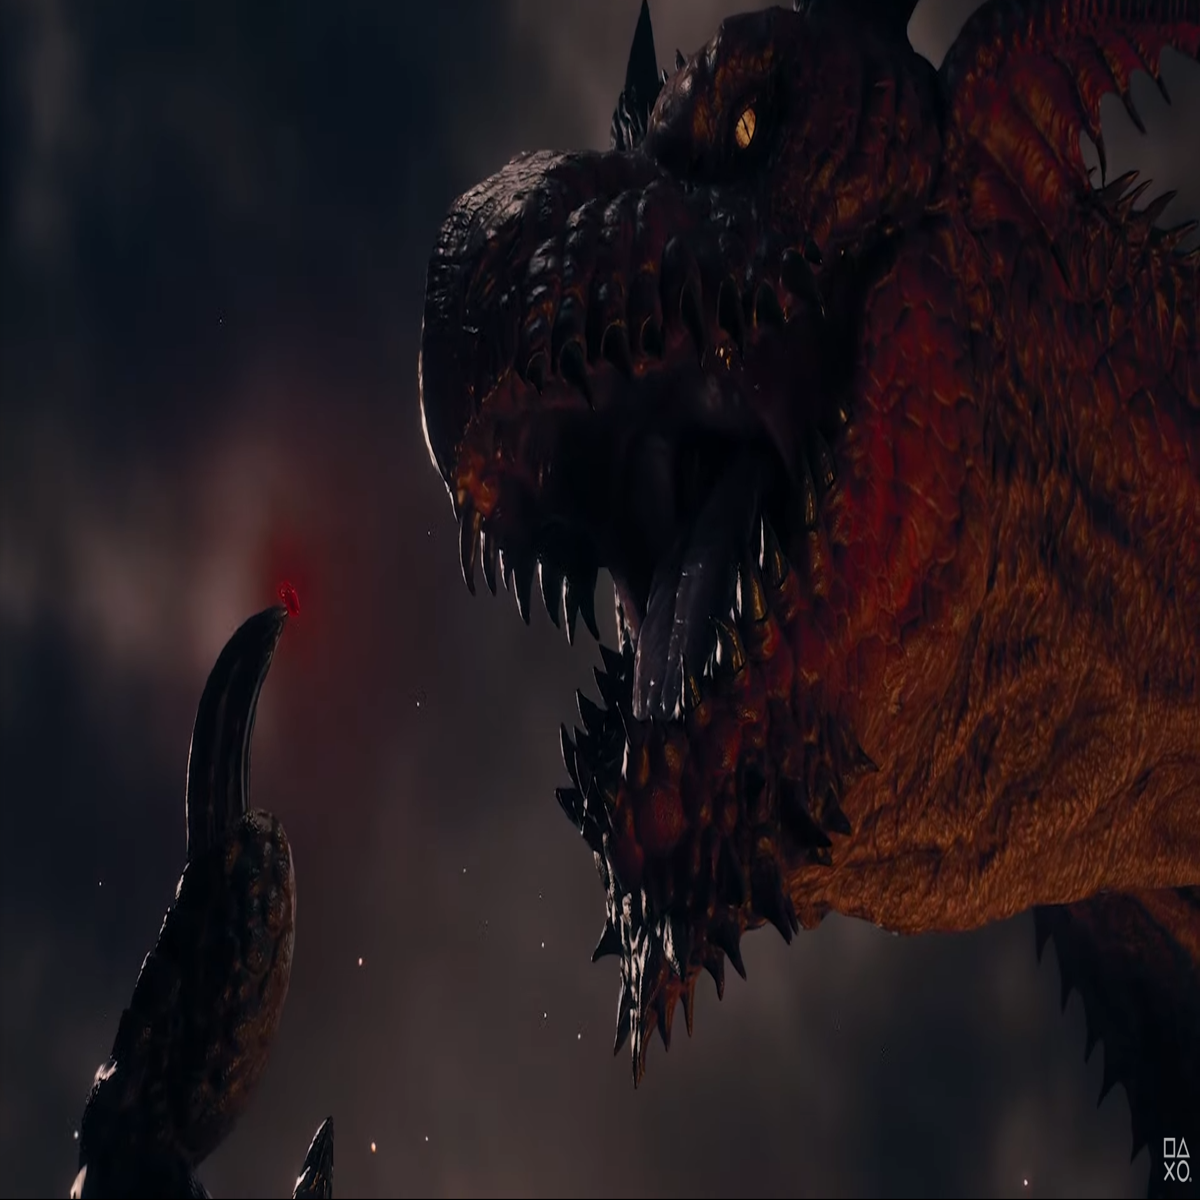 Capcom wants you to buy Dragon's Dogma 2 for $70 and yeah, I probably  wouldn't